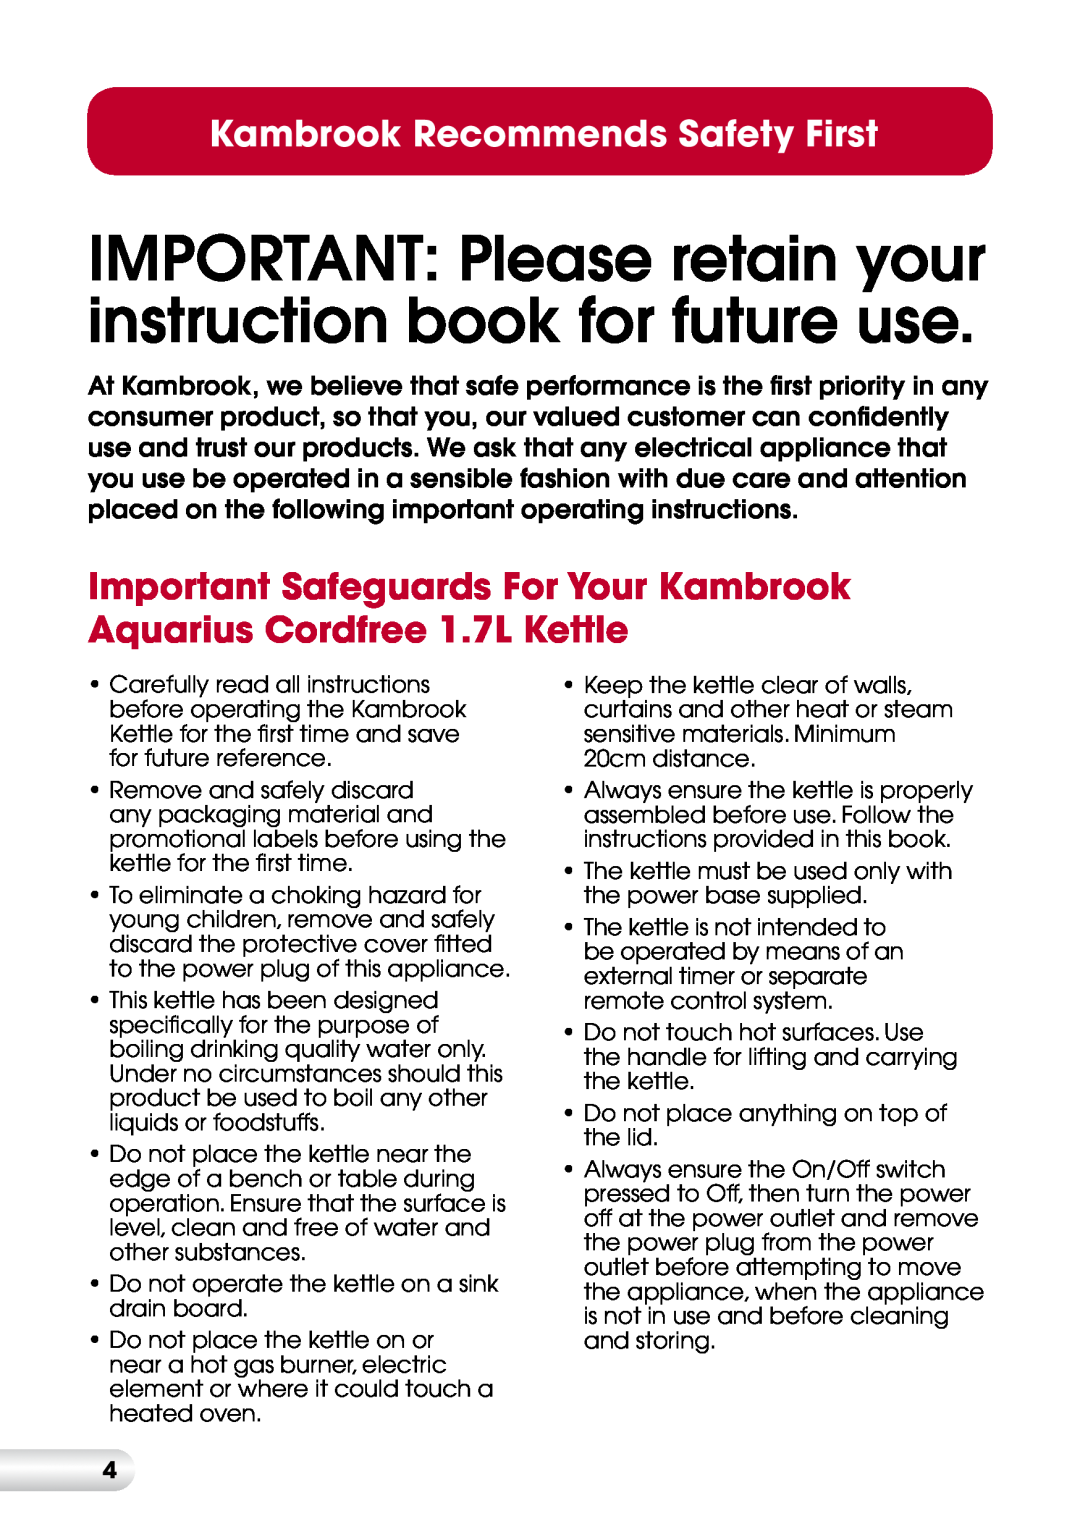 Kambrook KAK35 Important Safeguards For Your Kambrook Aquarius Cordfree 1.7L Kettle, Kambrook Recommends Safety First 